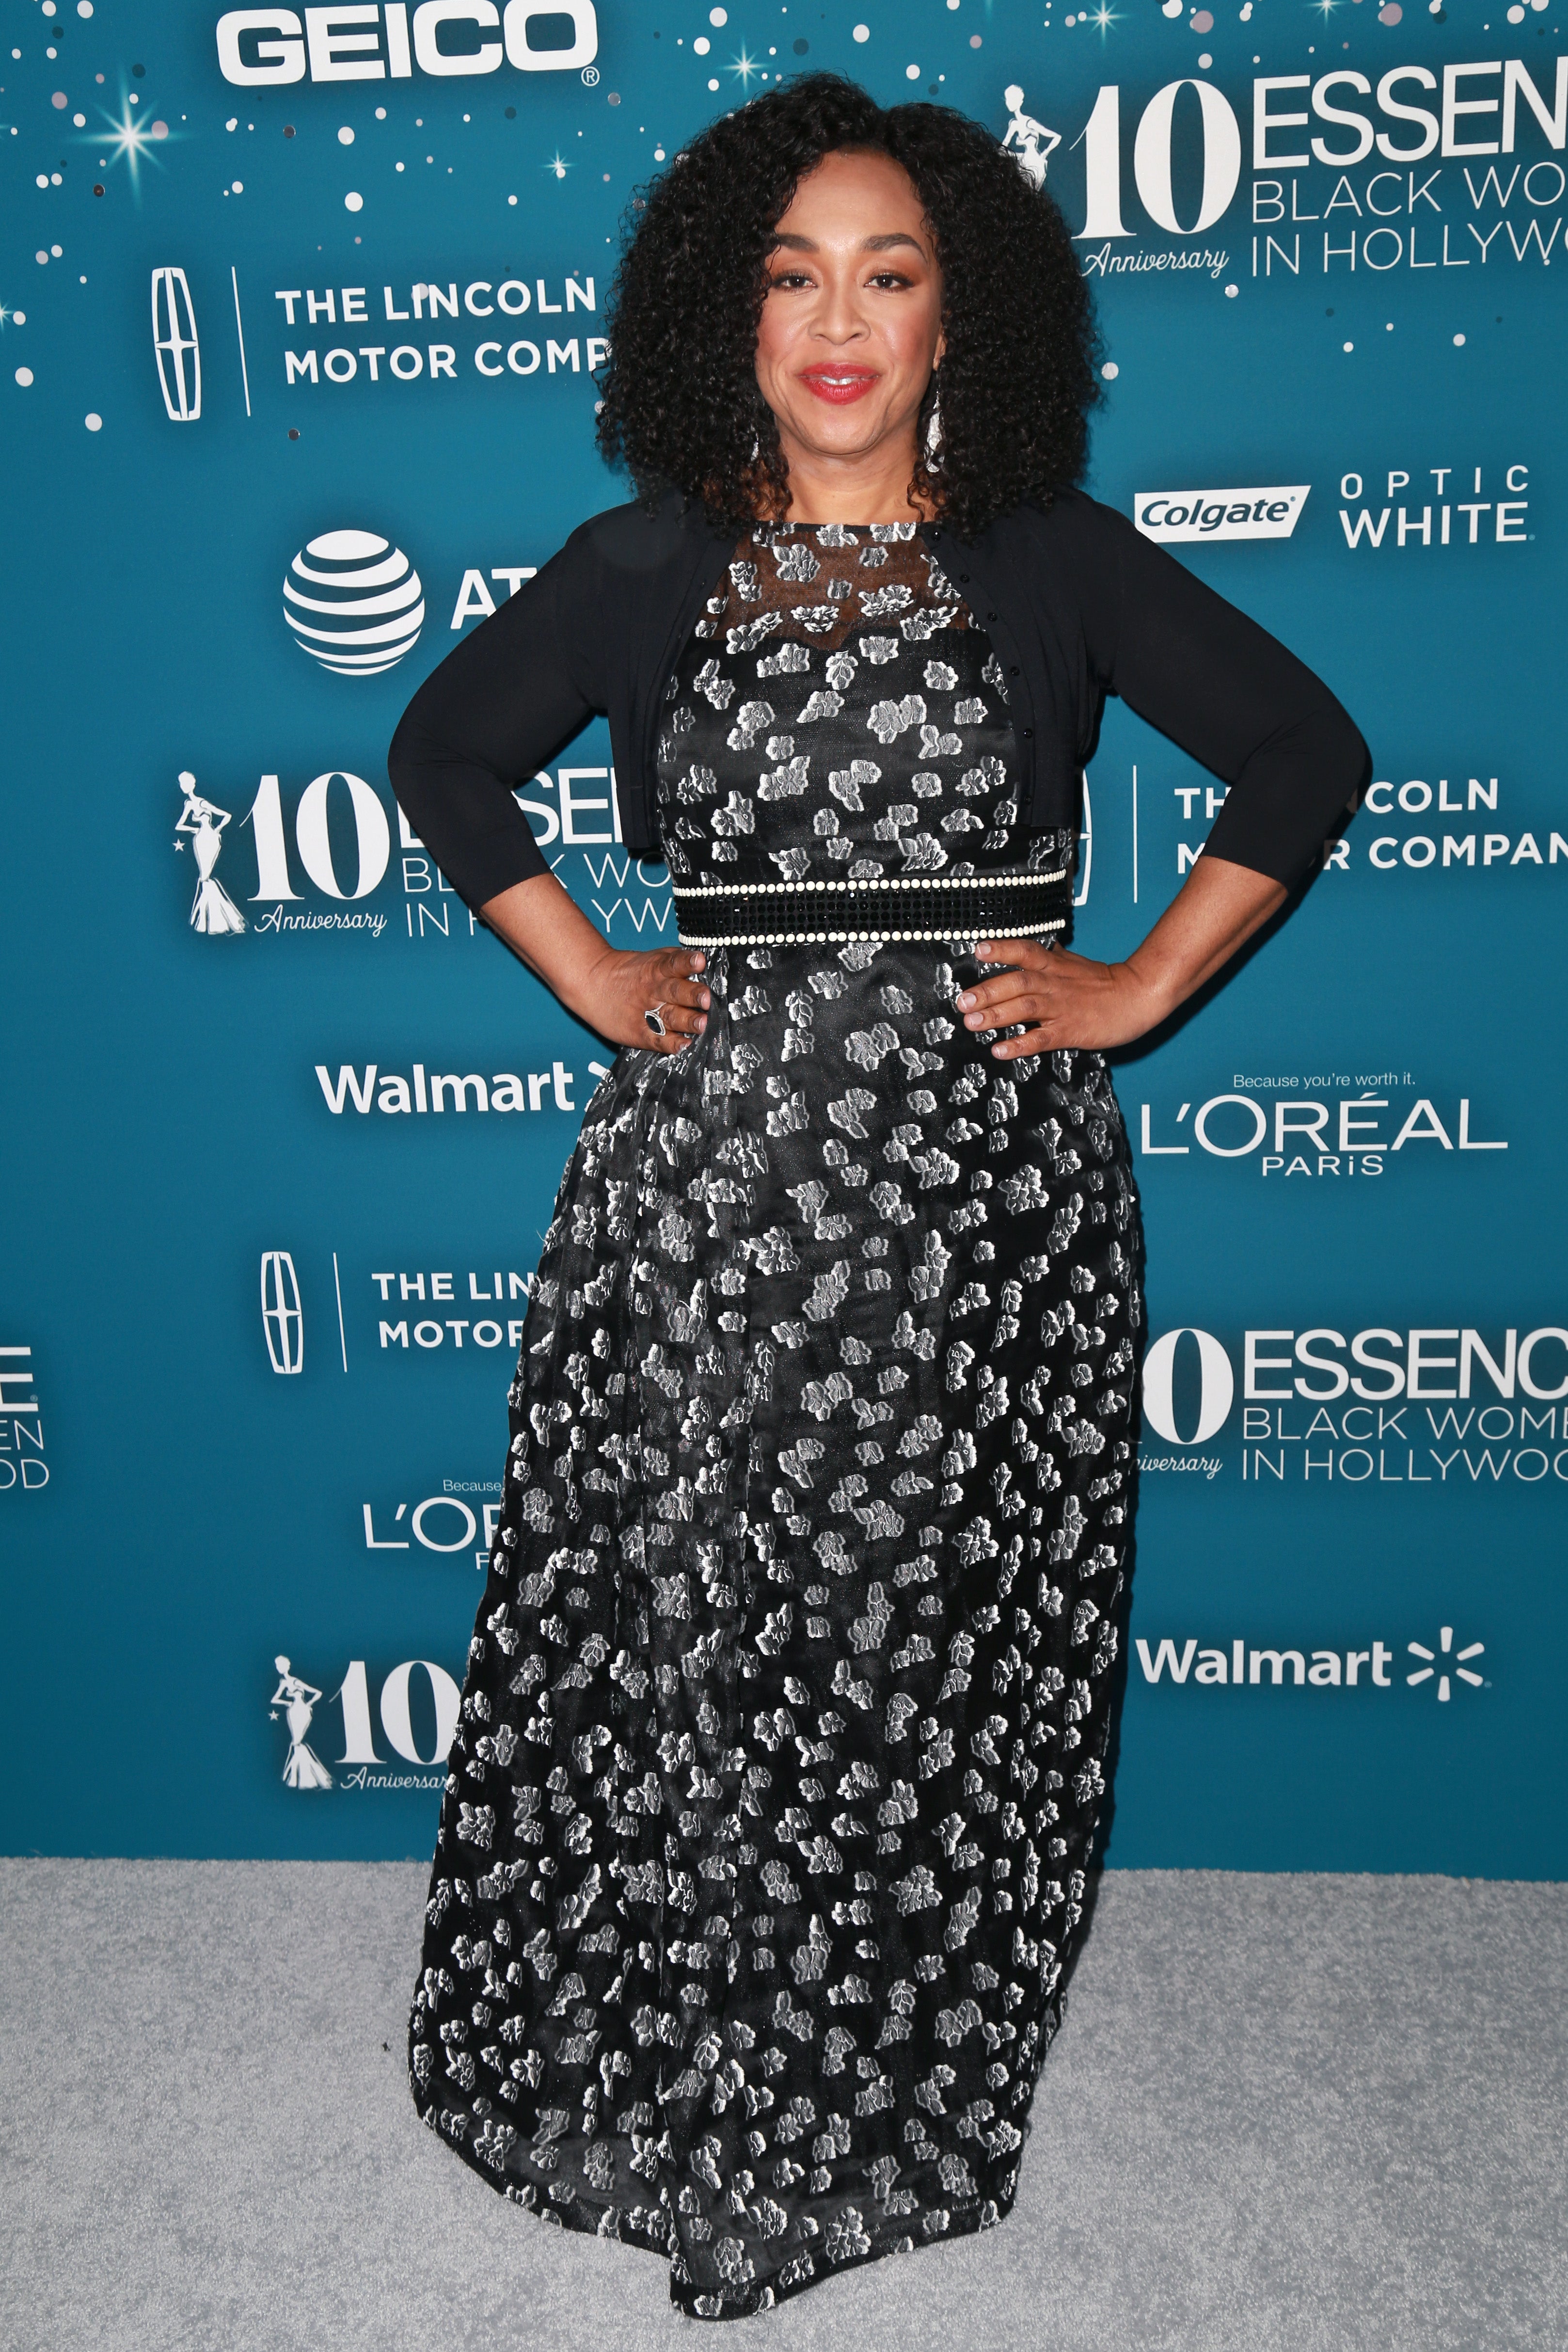 The 10th Annual Black Women in Hollywood Red Carpet Was Beyond Fabulous